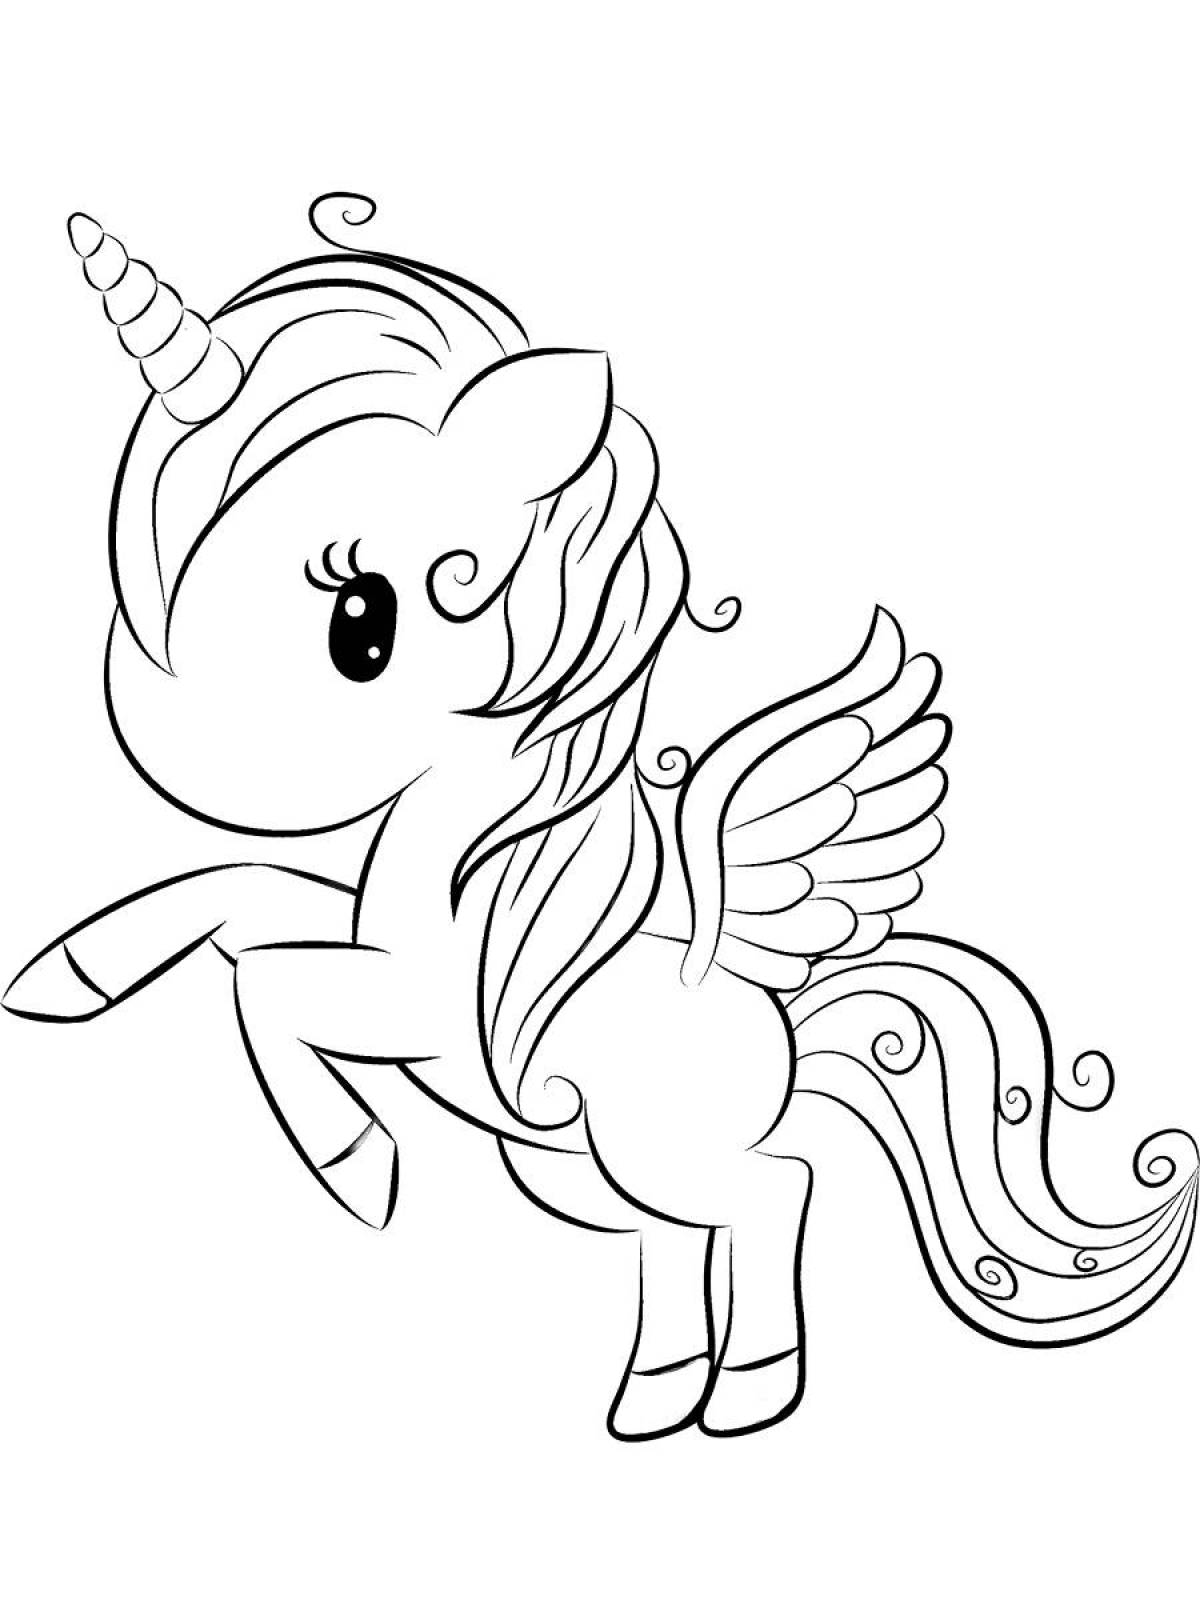 Majestic unicorn coloring pages for girls